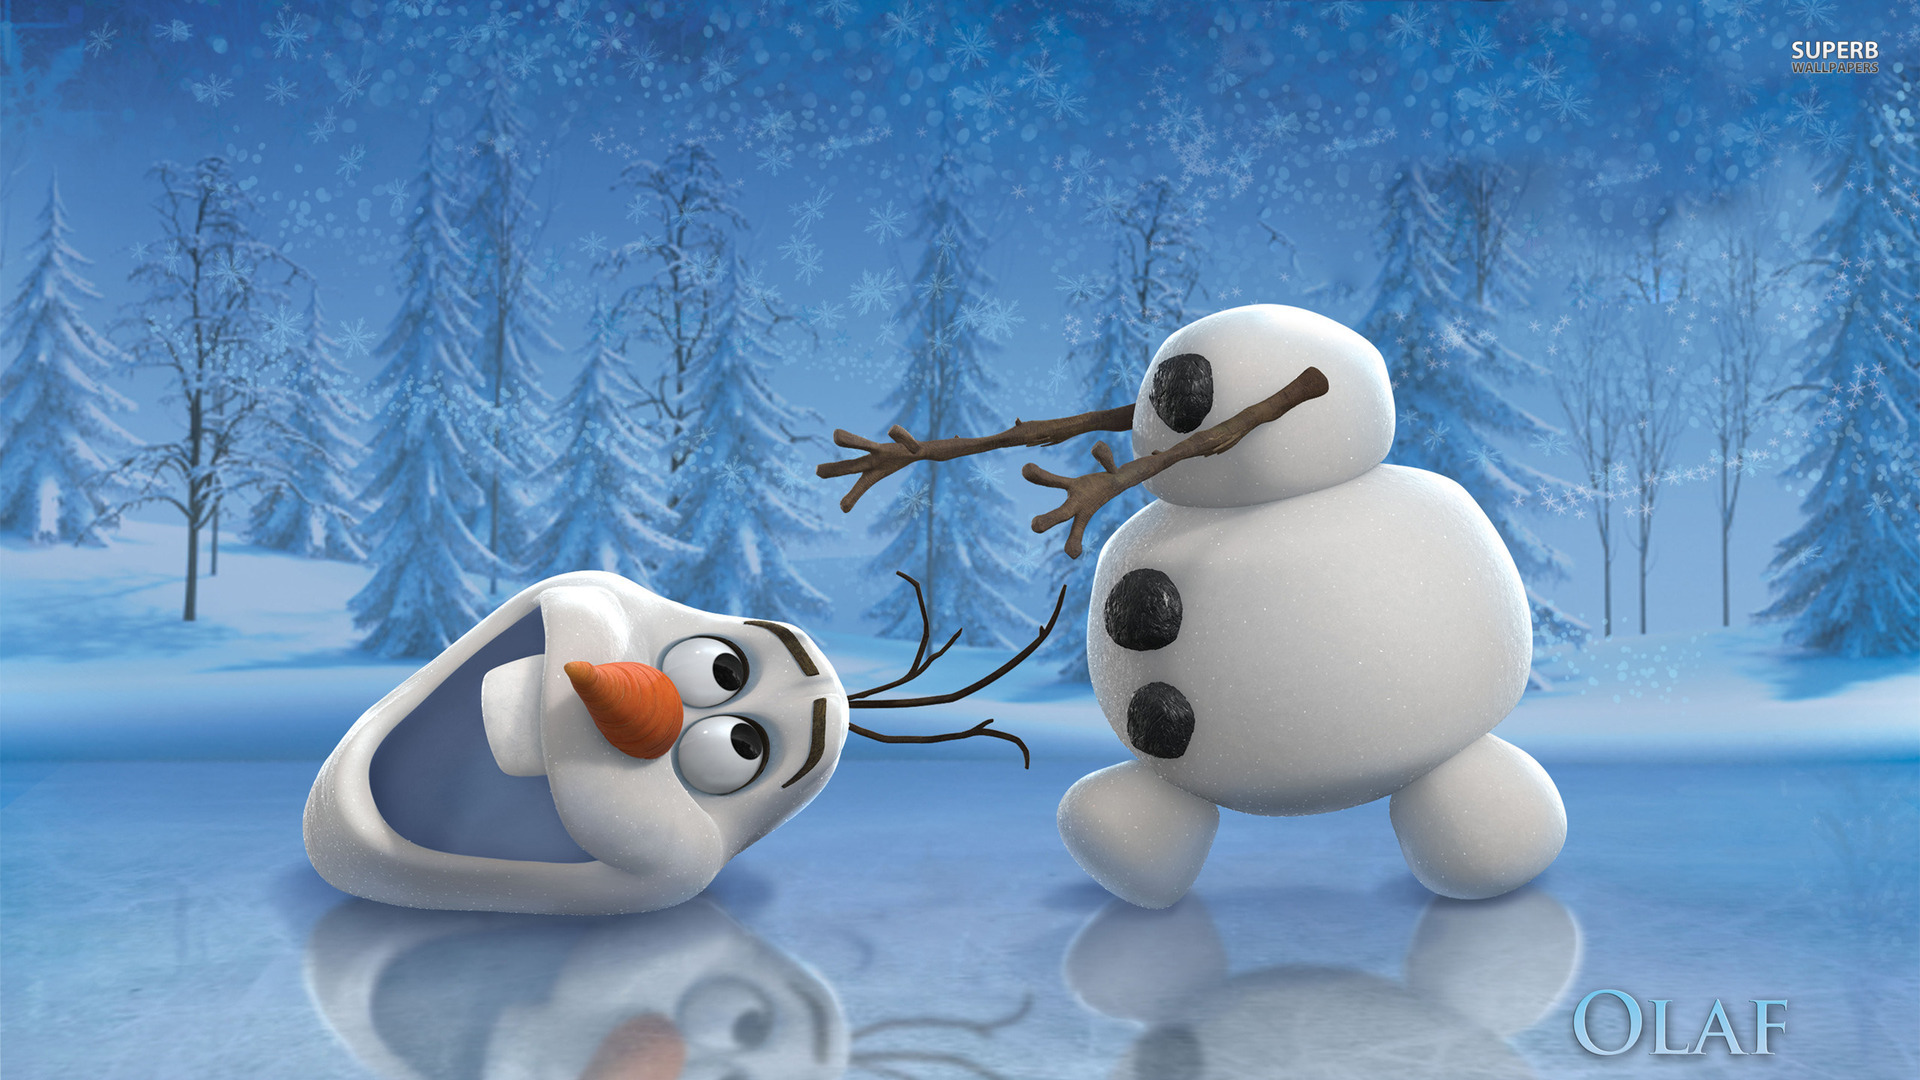 Funny Olaf in Frozen Movie Exclusive HD Wallpapers 1920x1080